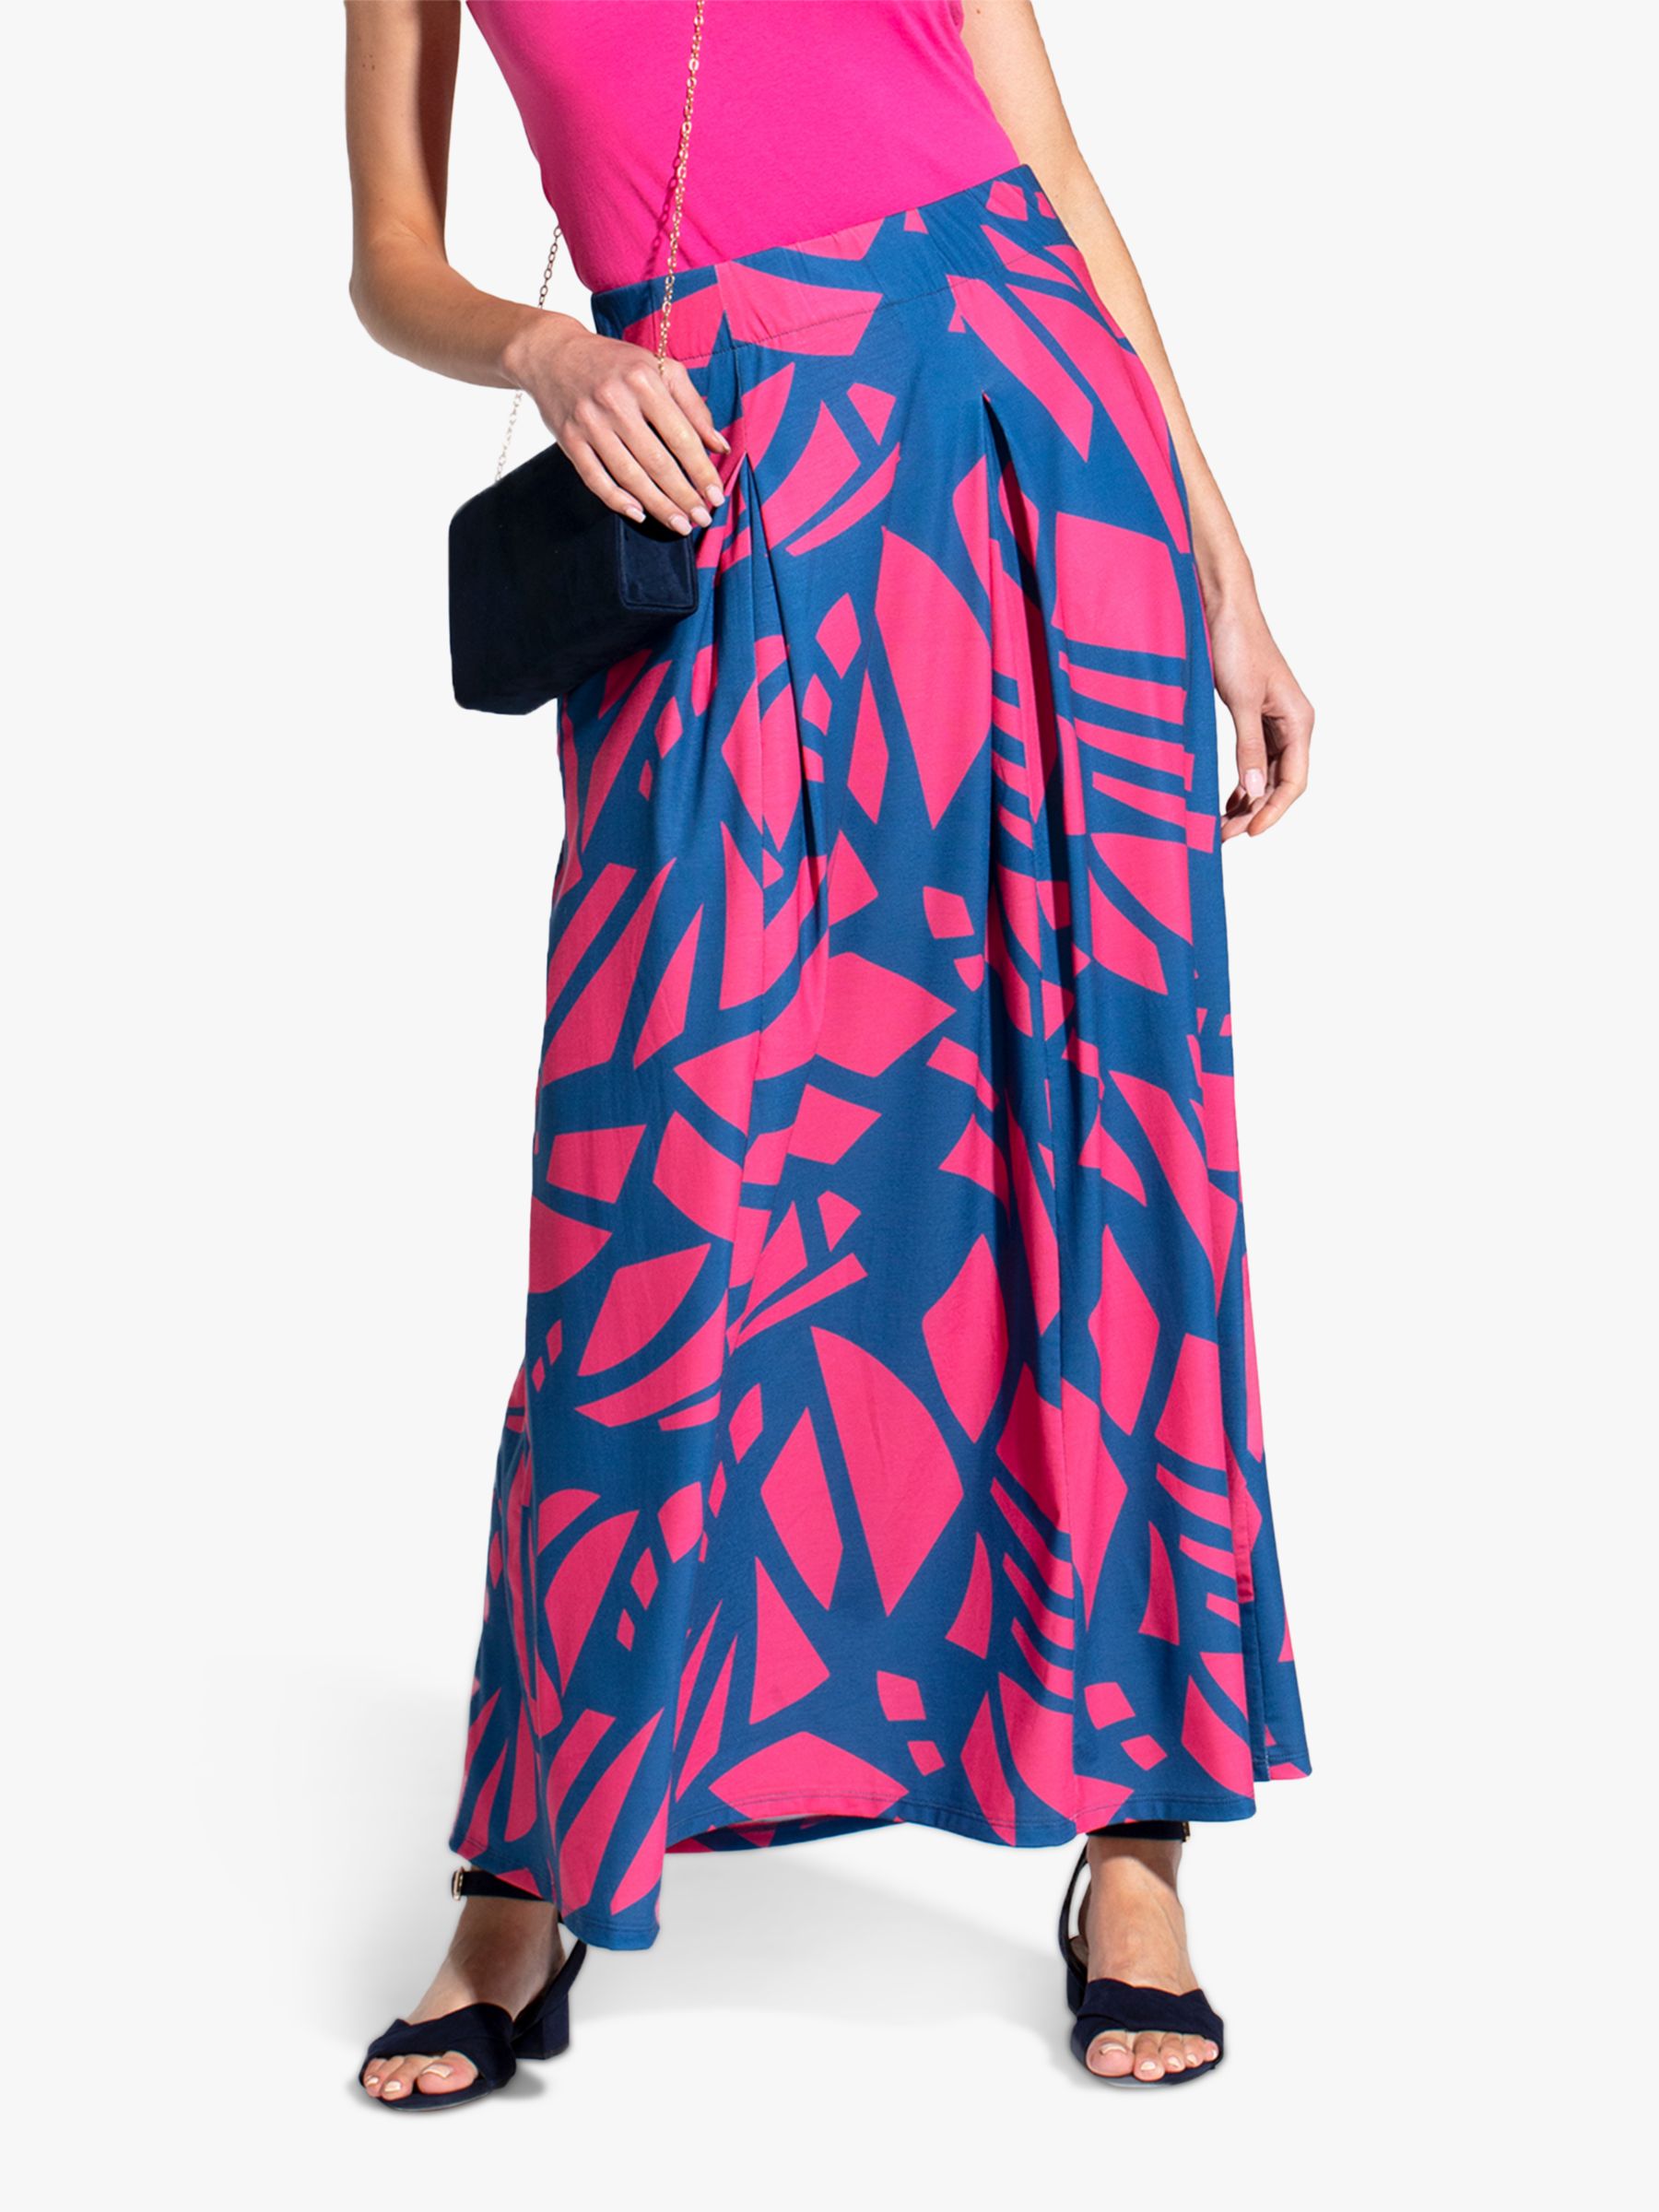 Buy HotSquash Abstract Box Pleat Maxi Skirt, Matisse Teal/Pink Online at johnlewis.com